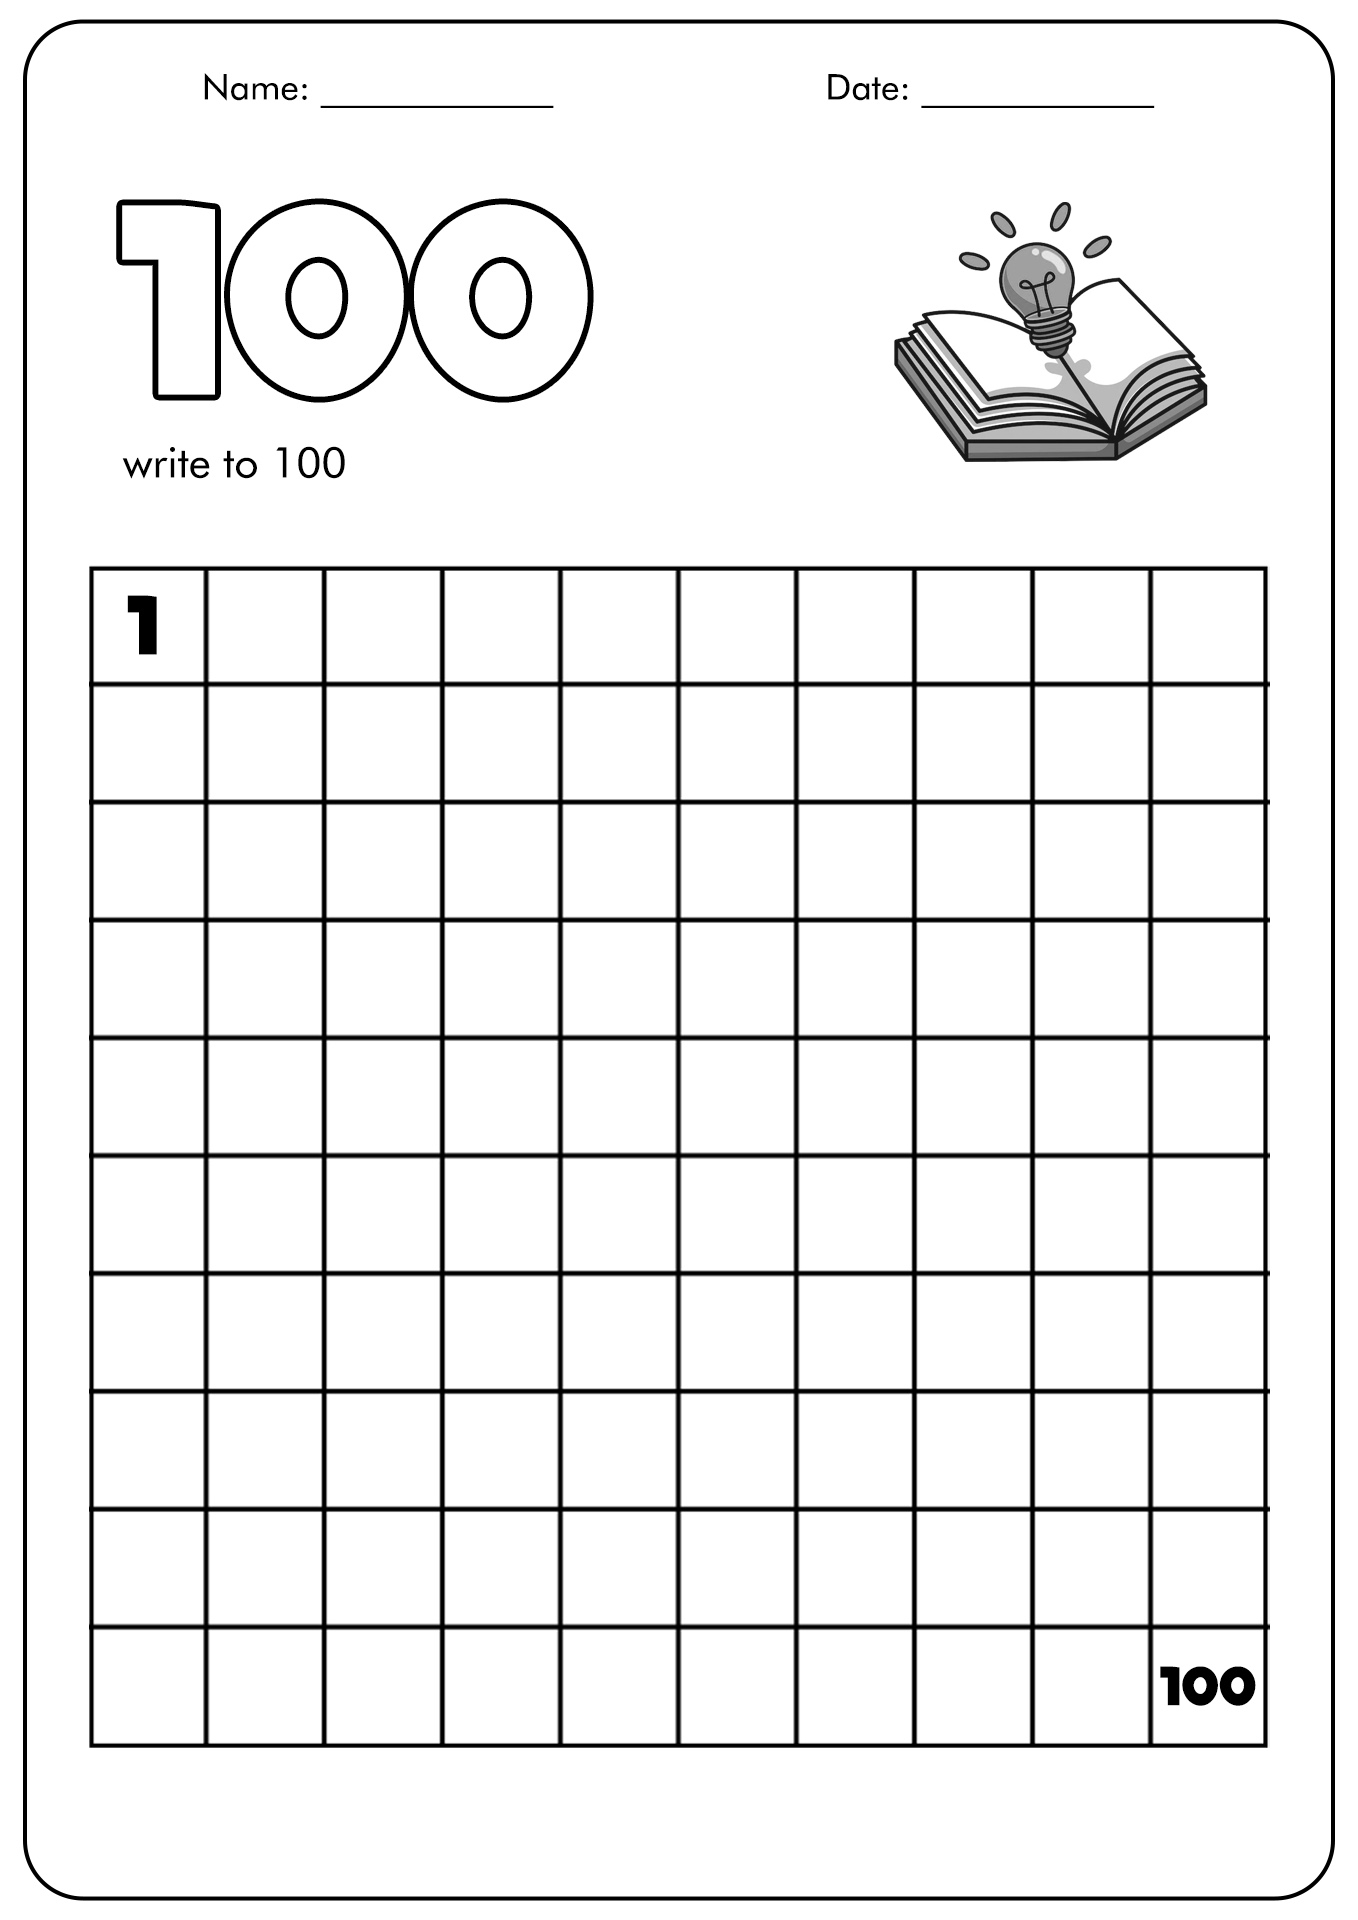 Blank Counting to 100 Worksheet